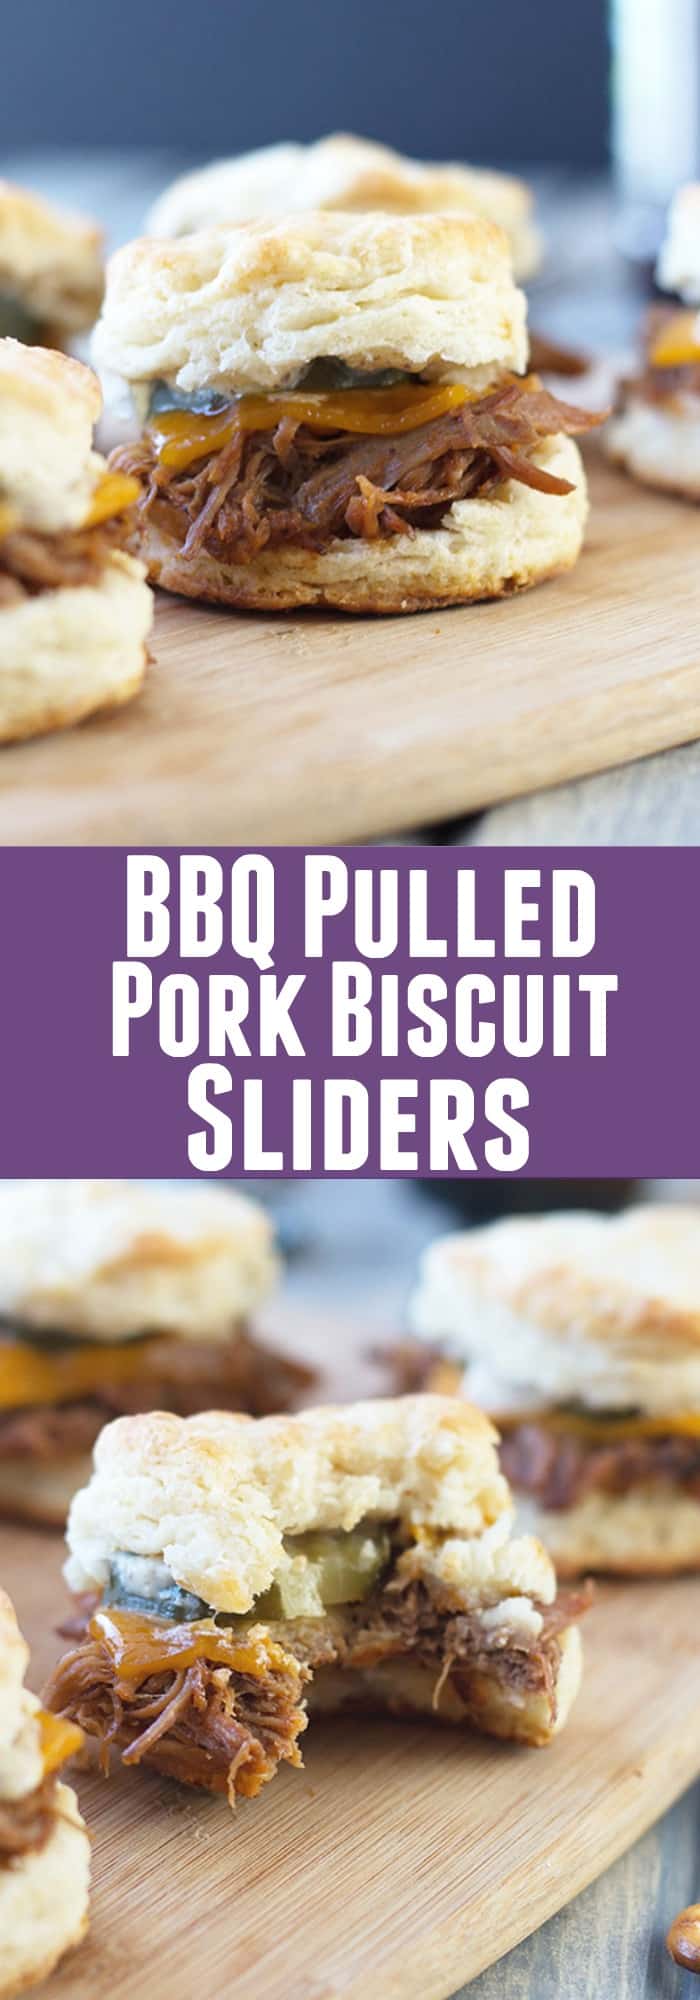 BBQ Pulled Pork Biscuit Sliders -perfect little sandwiches with smokey pulled pork, melted cheddar and Dijon mustard. | countrysidecravings.com